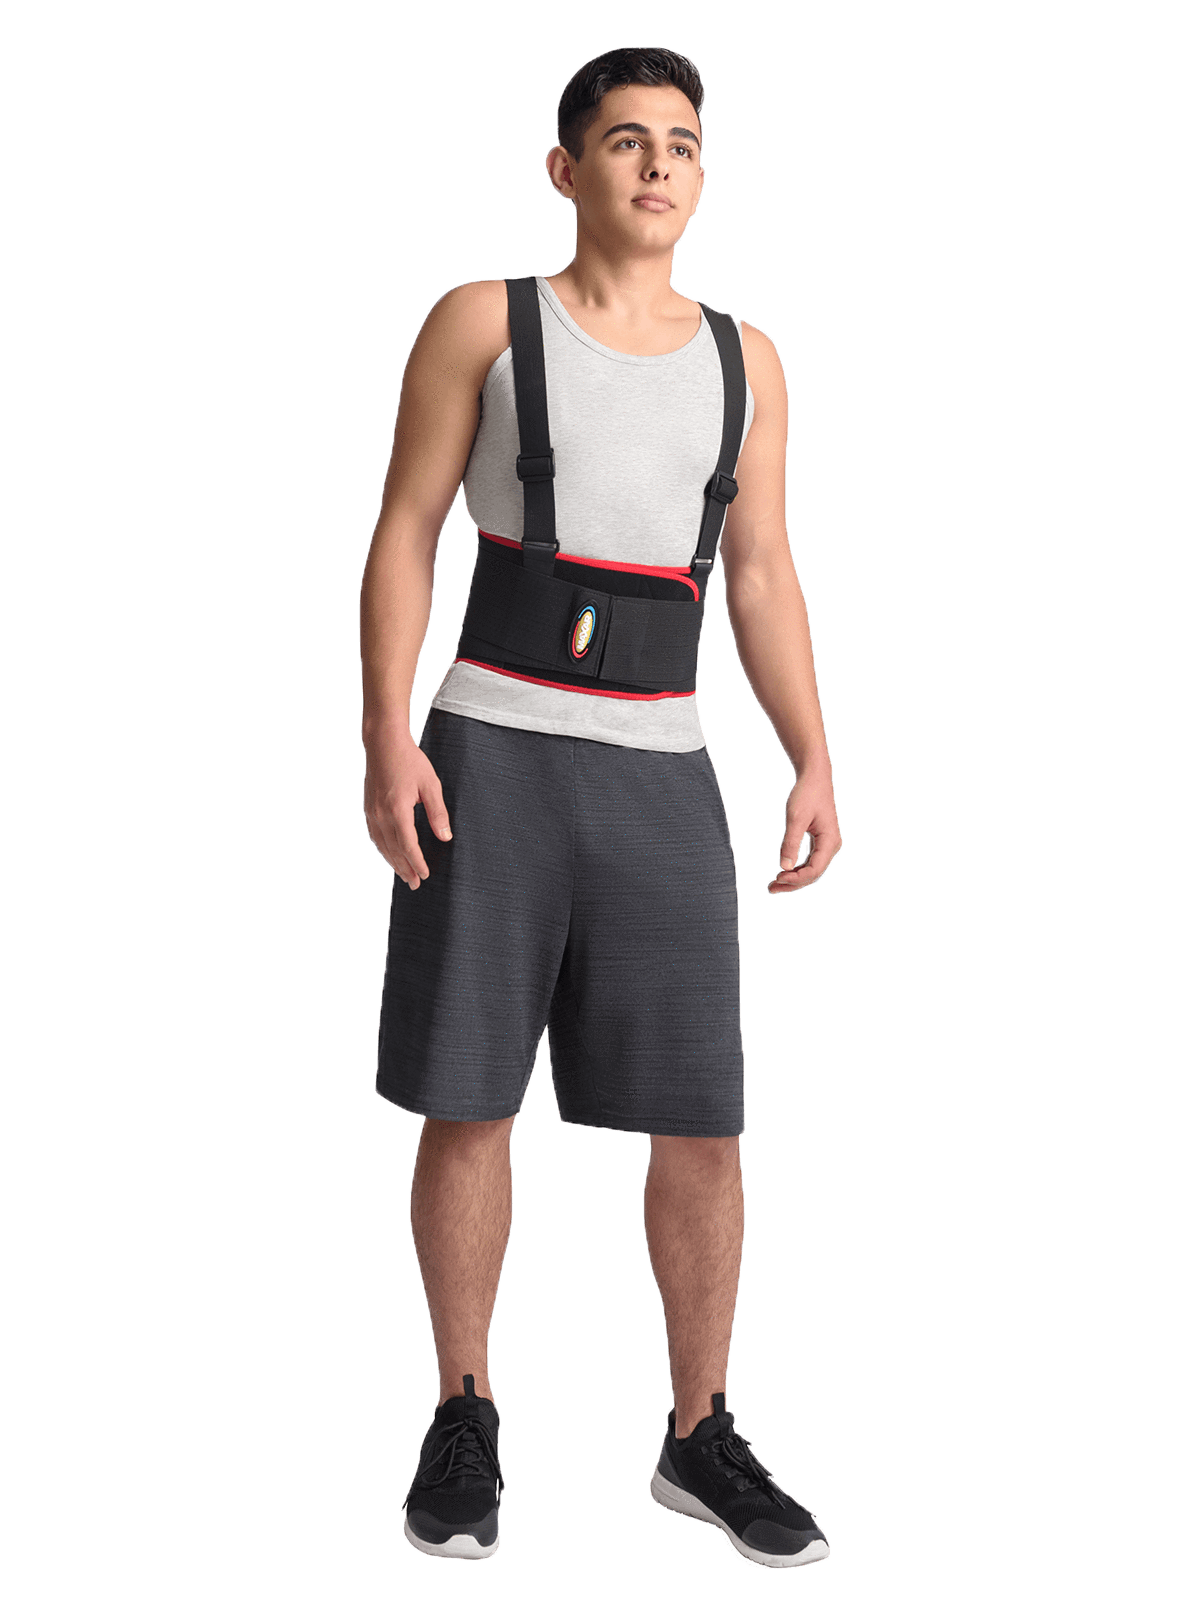 Back Brace For Work  Workers Back Support - Lumbar Support